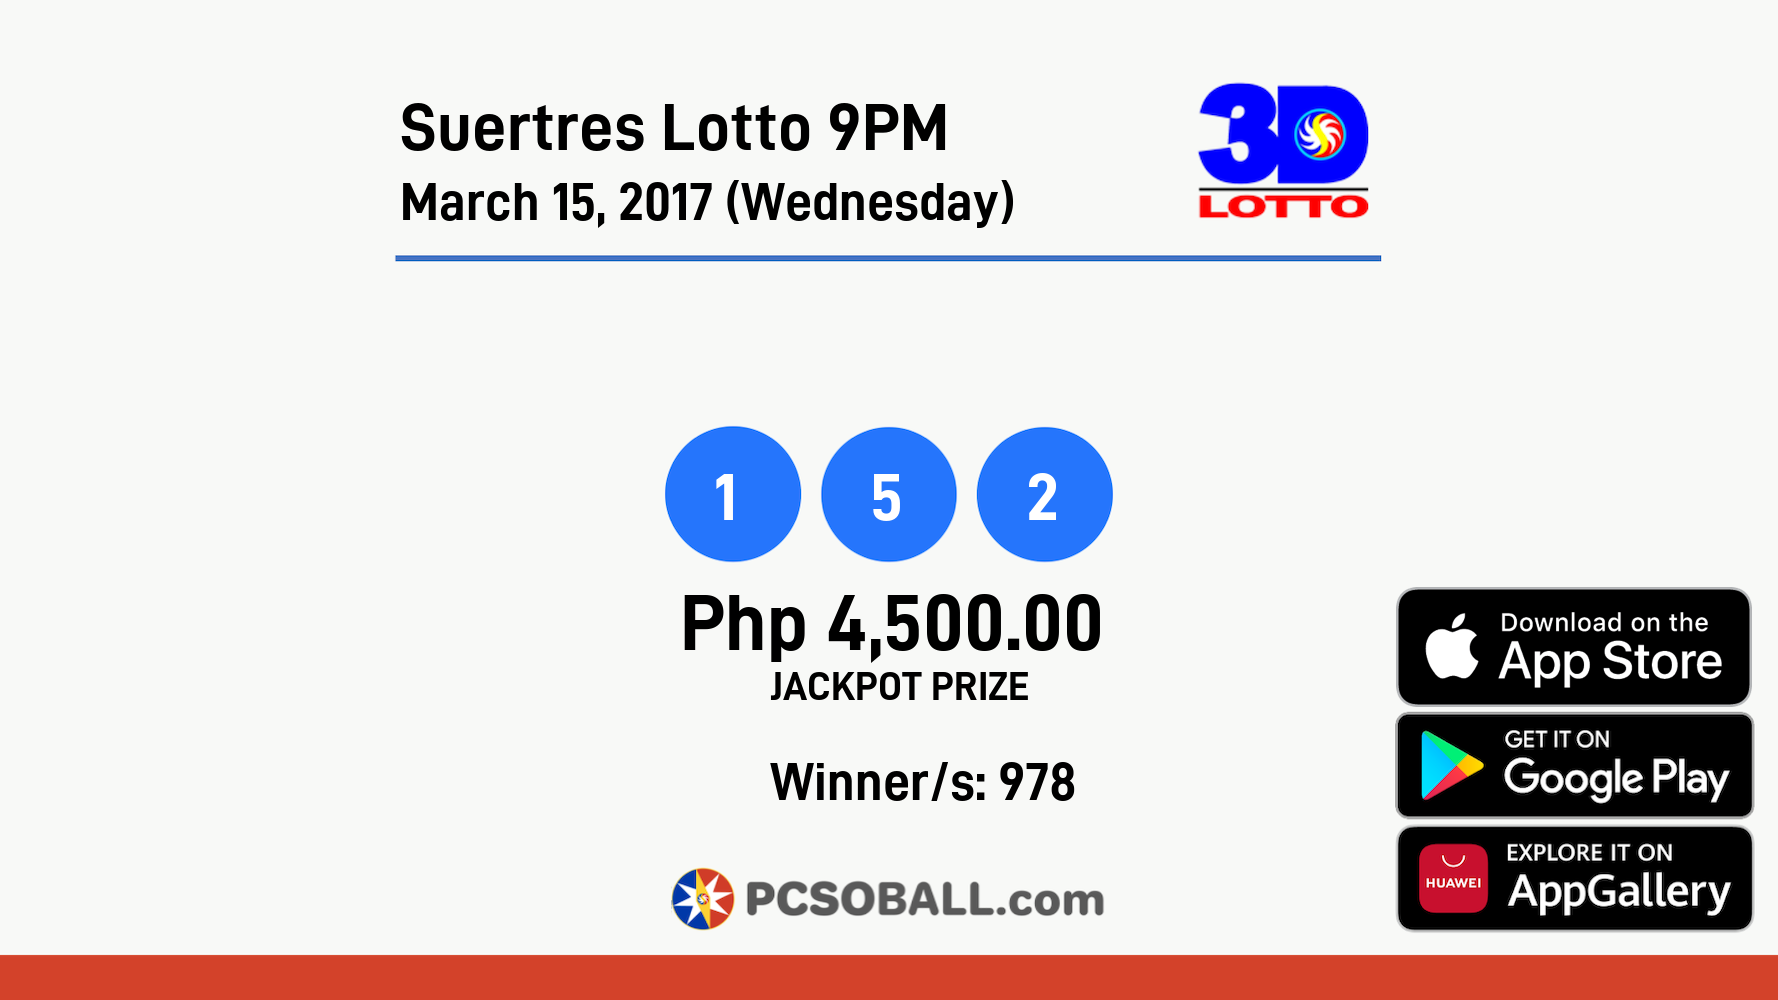 Suertres Lotto 9PM March 15, 2017 (Wednesday) Result